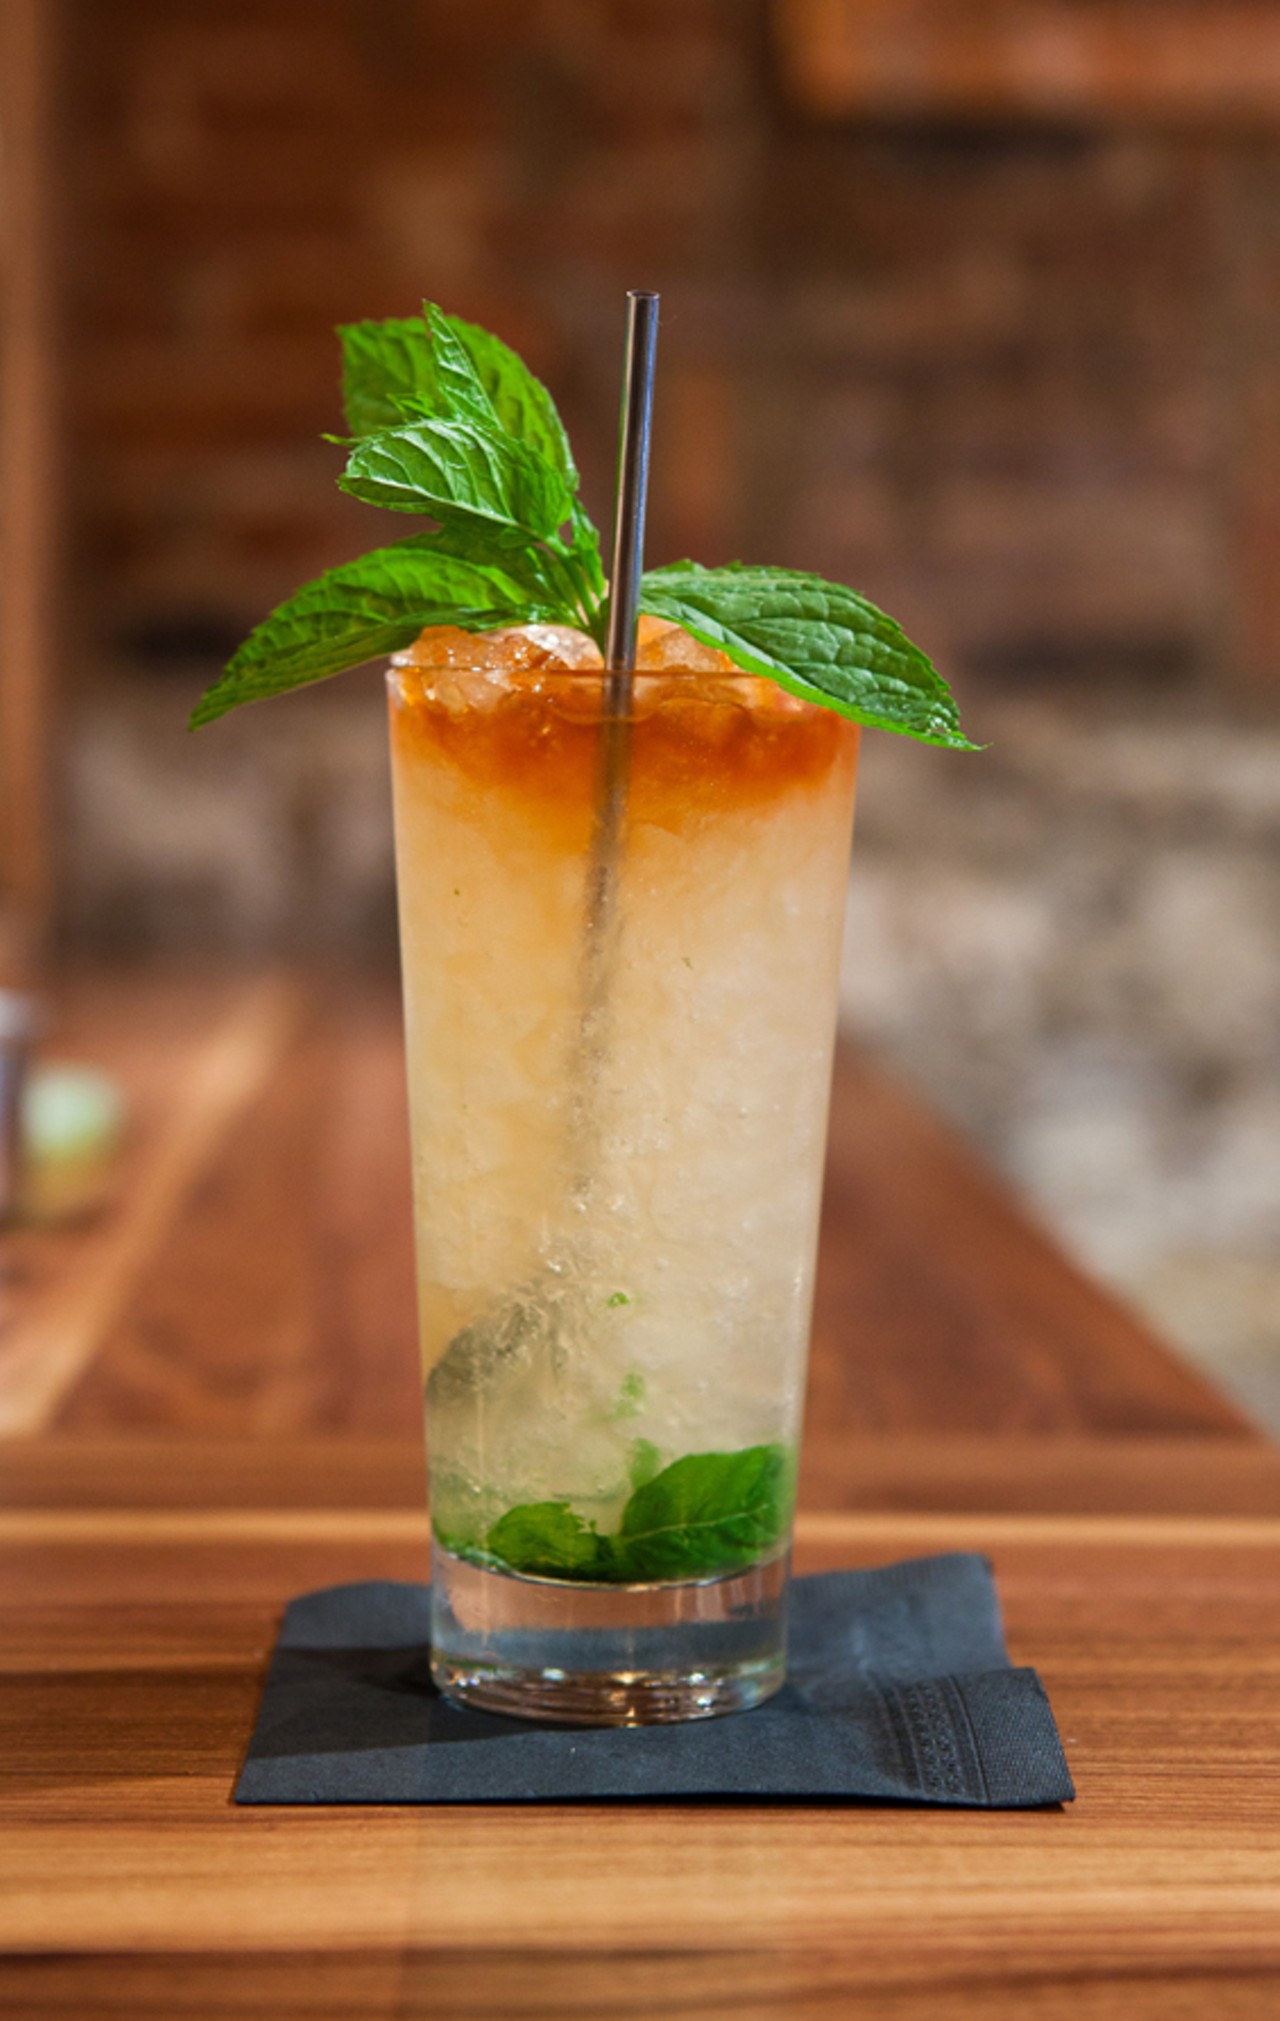 The Queen Park Swizzle, a cocktail made with Don Q Anejo rum, lime, mint and Angostura.